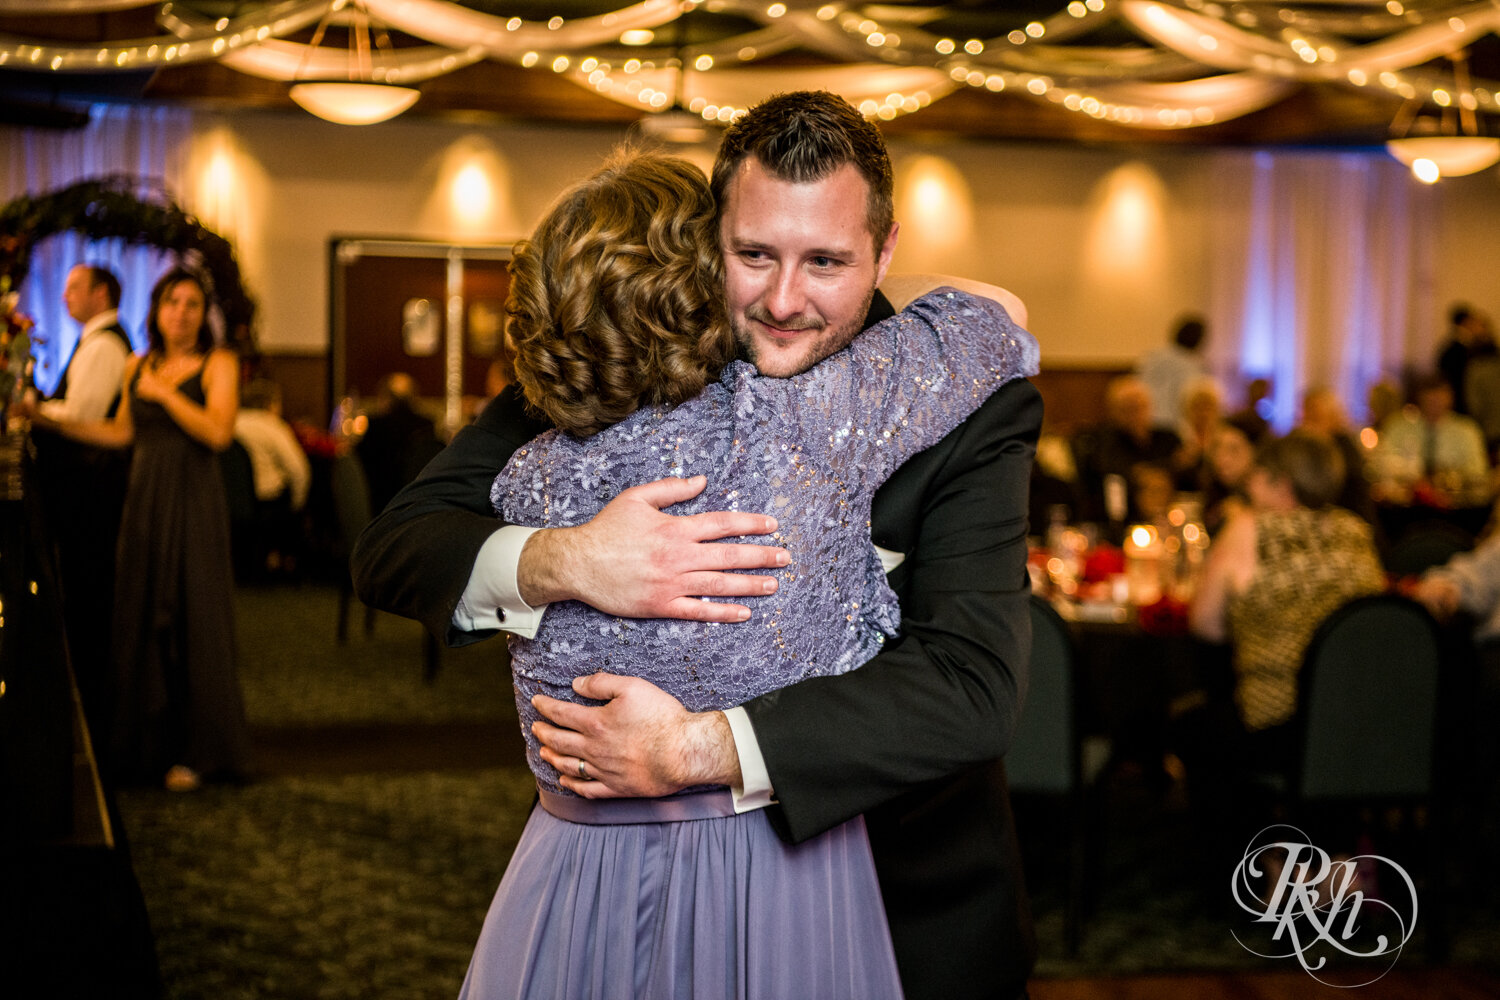 Groom and his mom dance at wedding reception at Rockwoods in Otsego, Minnesota.